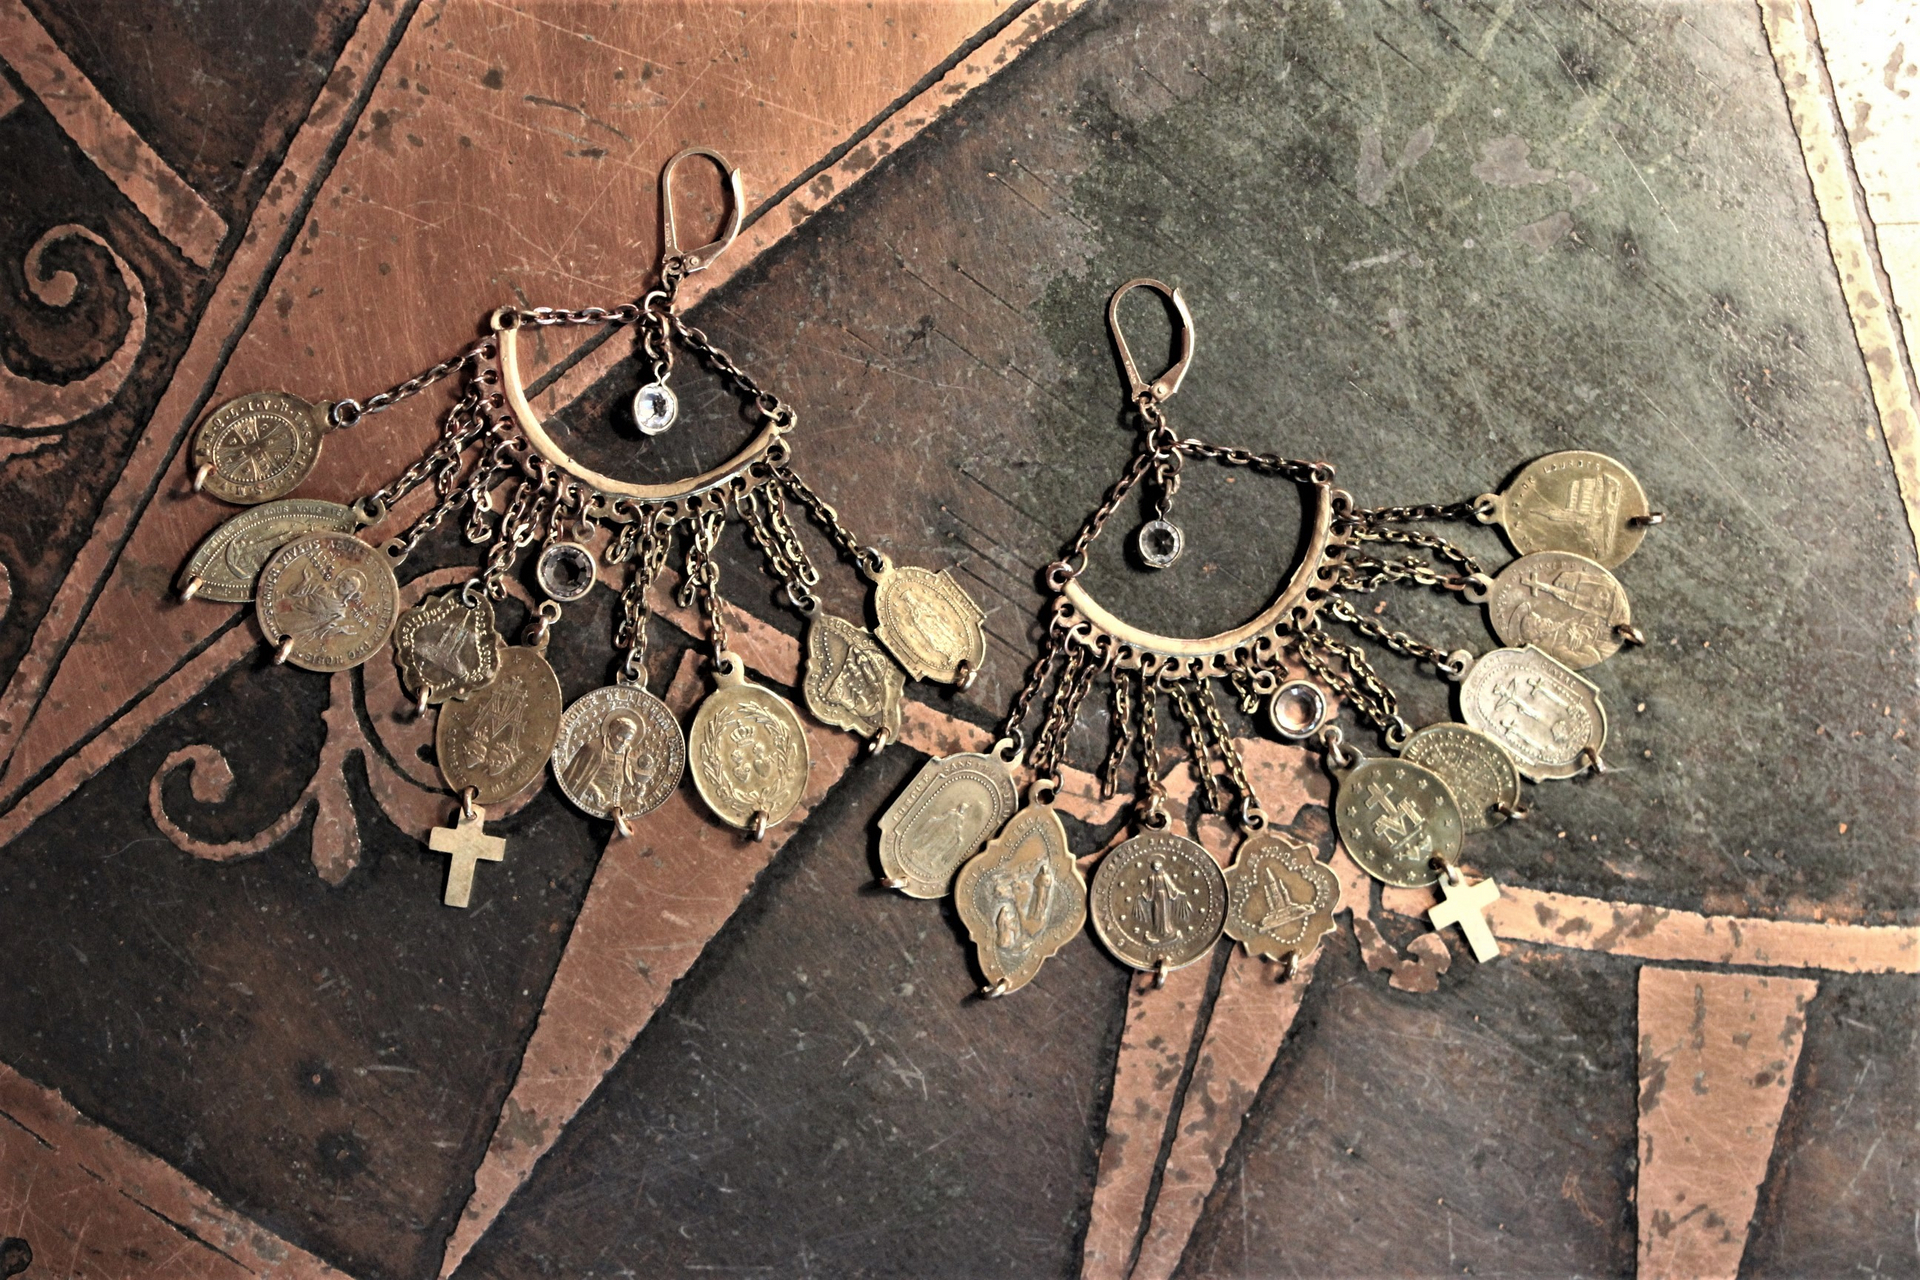 Antique French Medals Dangle Earrings with 18 Medals, Faceted Crystal Drops, Vintage Chains and Gold Fill Leverback Earring Wires